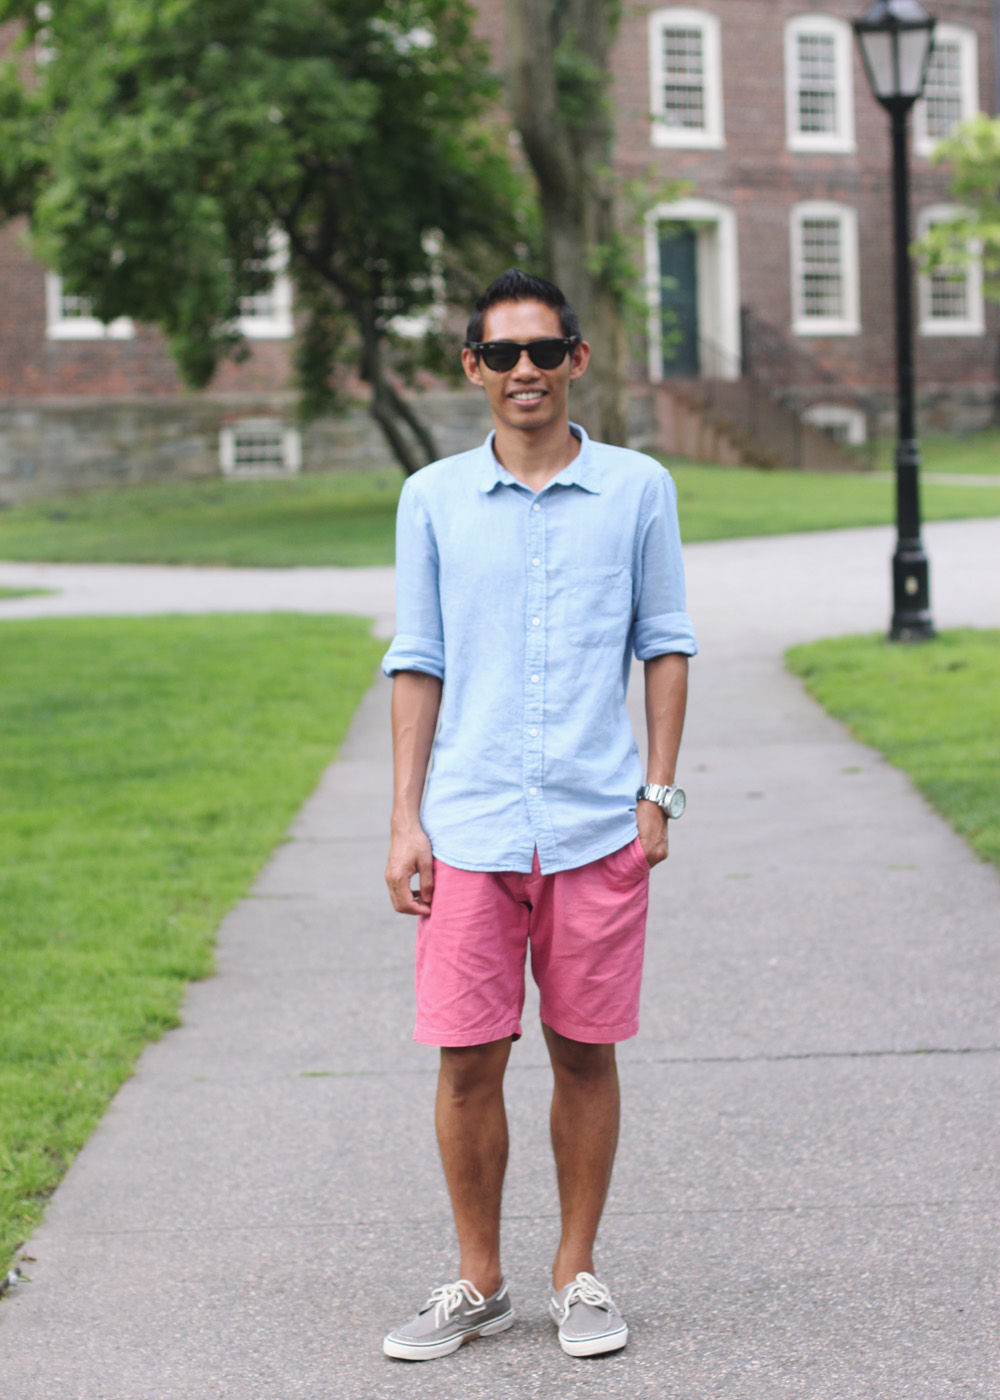 Skirt The Rules Blog; NYC fashion blogger; style blog; summer outfit photos; men's summer fashion; H&M chambray shirt; J.Crew pink chino shorts; Sperry Topsider gray boat shoes; Ray-Ban large tortoise Wayfarers Nixon Silver 51-50 Watch